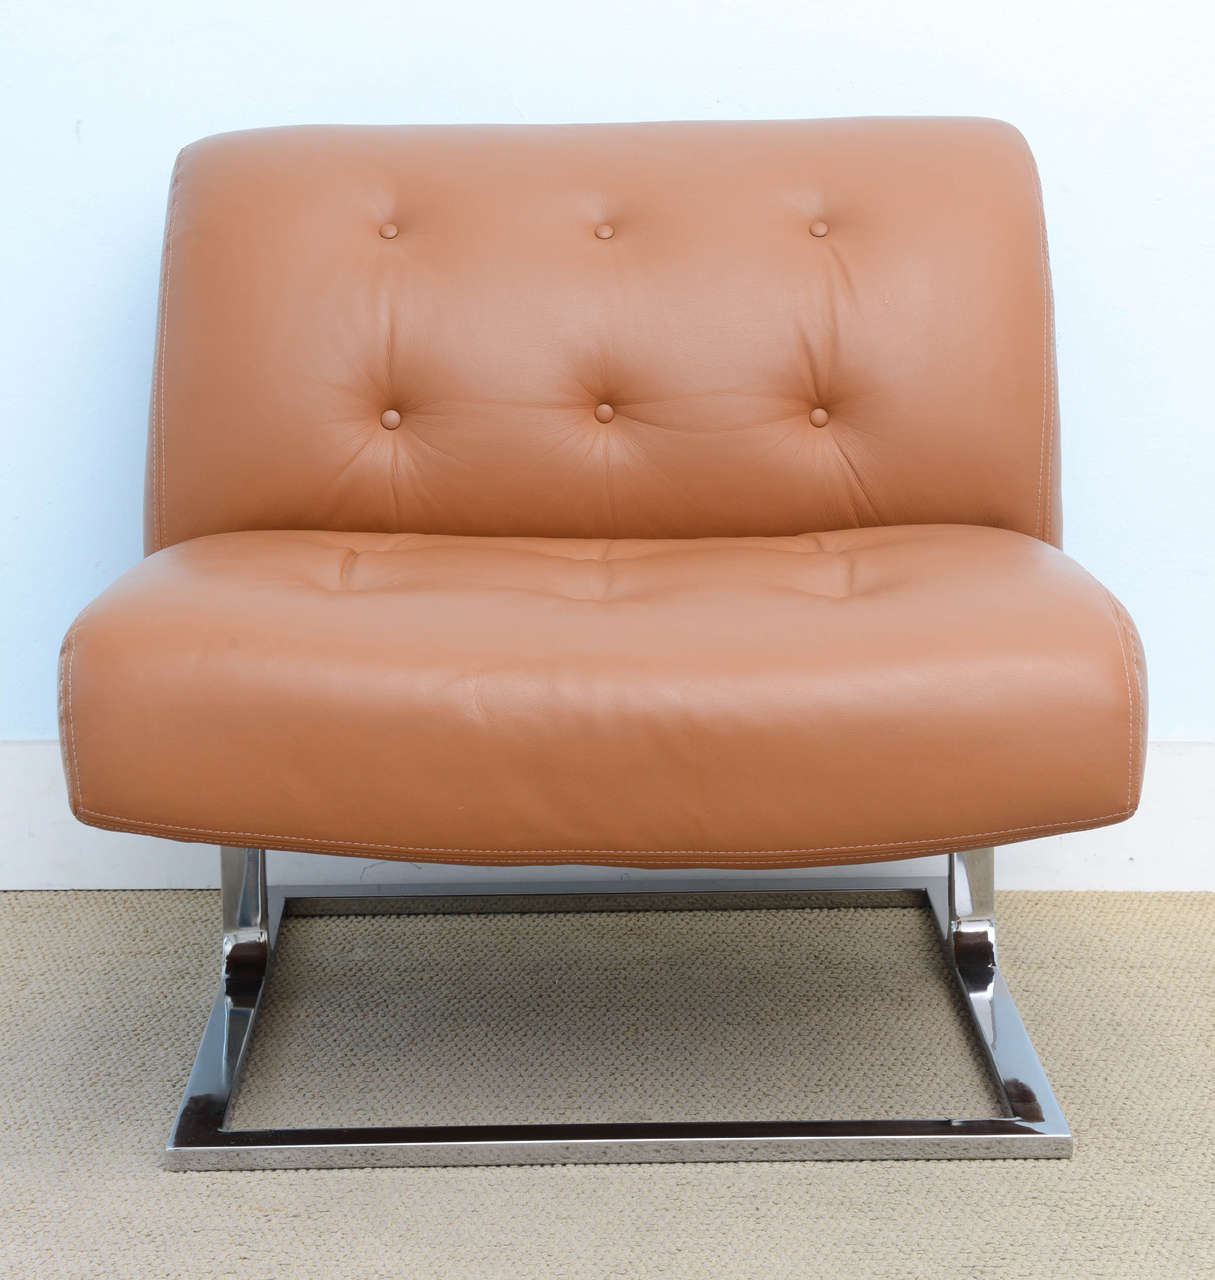 These amazing chairs are in very good condition and date back to the seventies . Very sculptural modern  look great for a minimalist , eclectic or MIDCENTURY interrior.